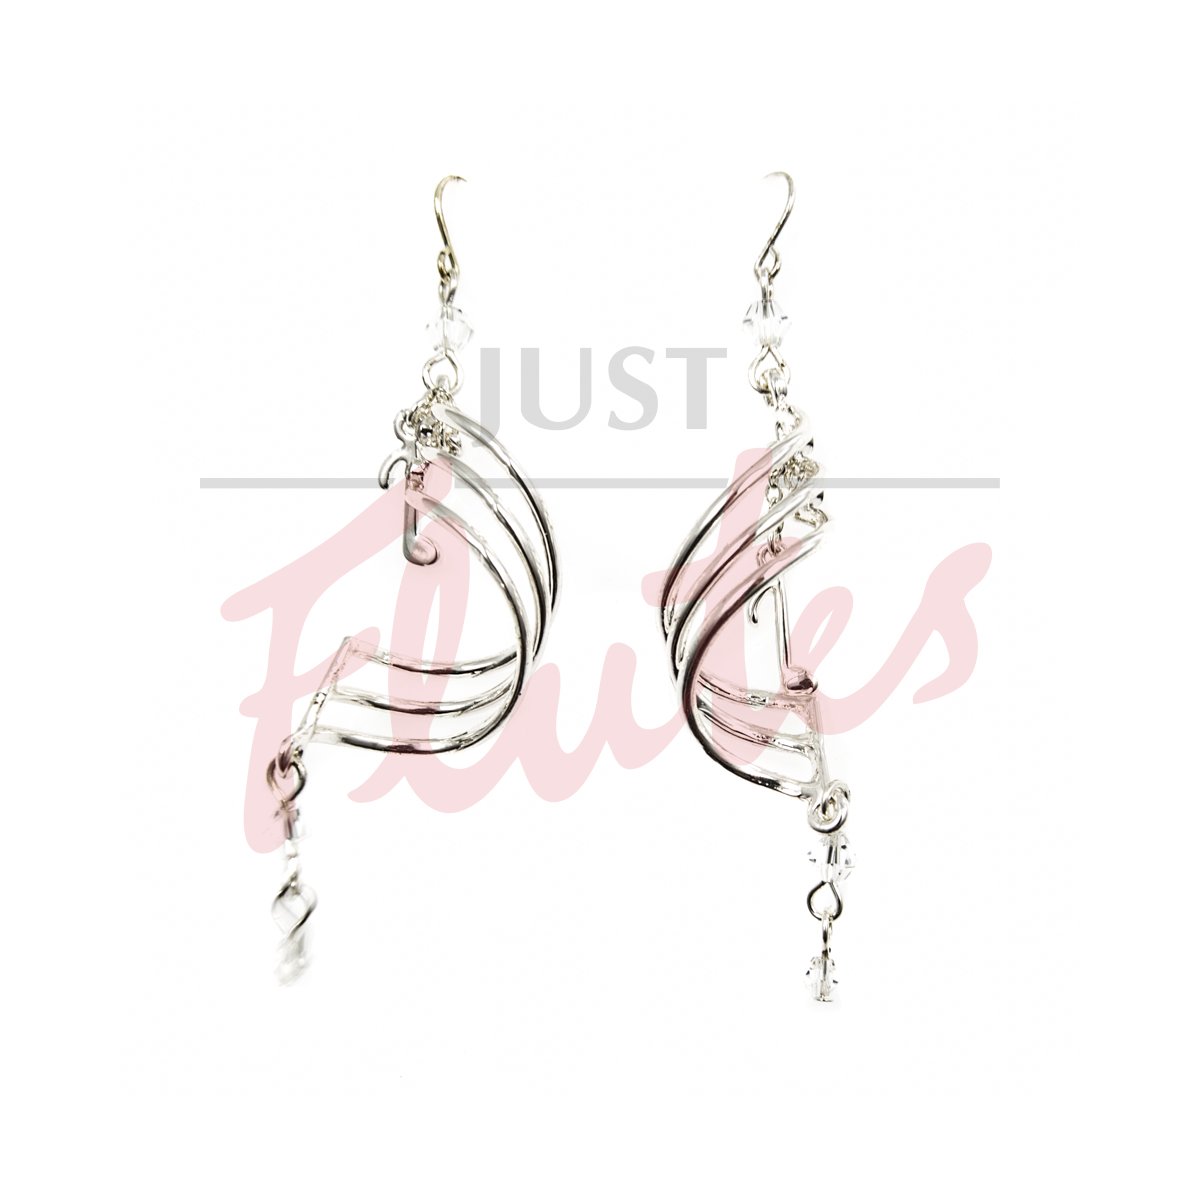 Music Gifts Silver-Plated Musical Note Drop Earrings